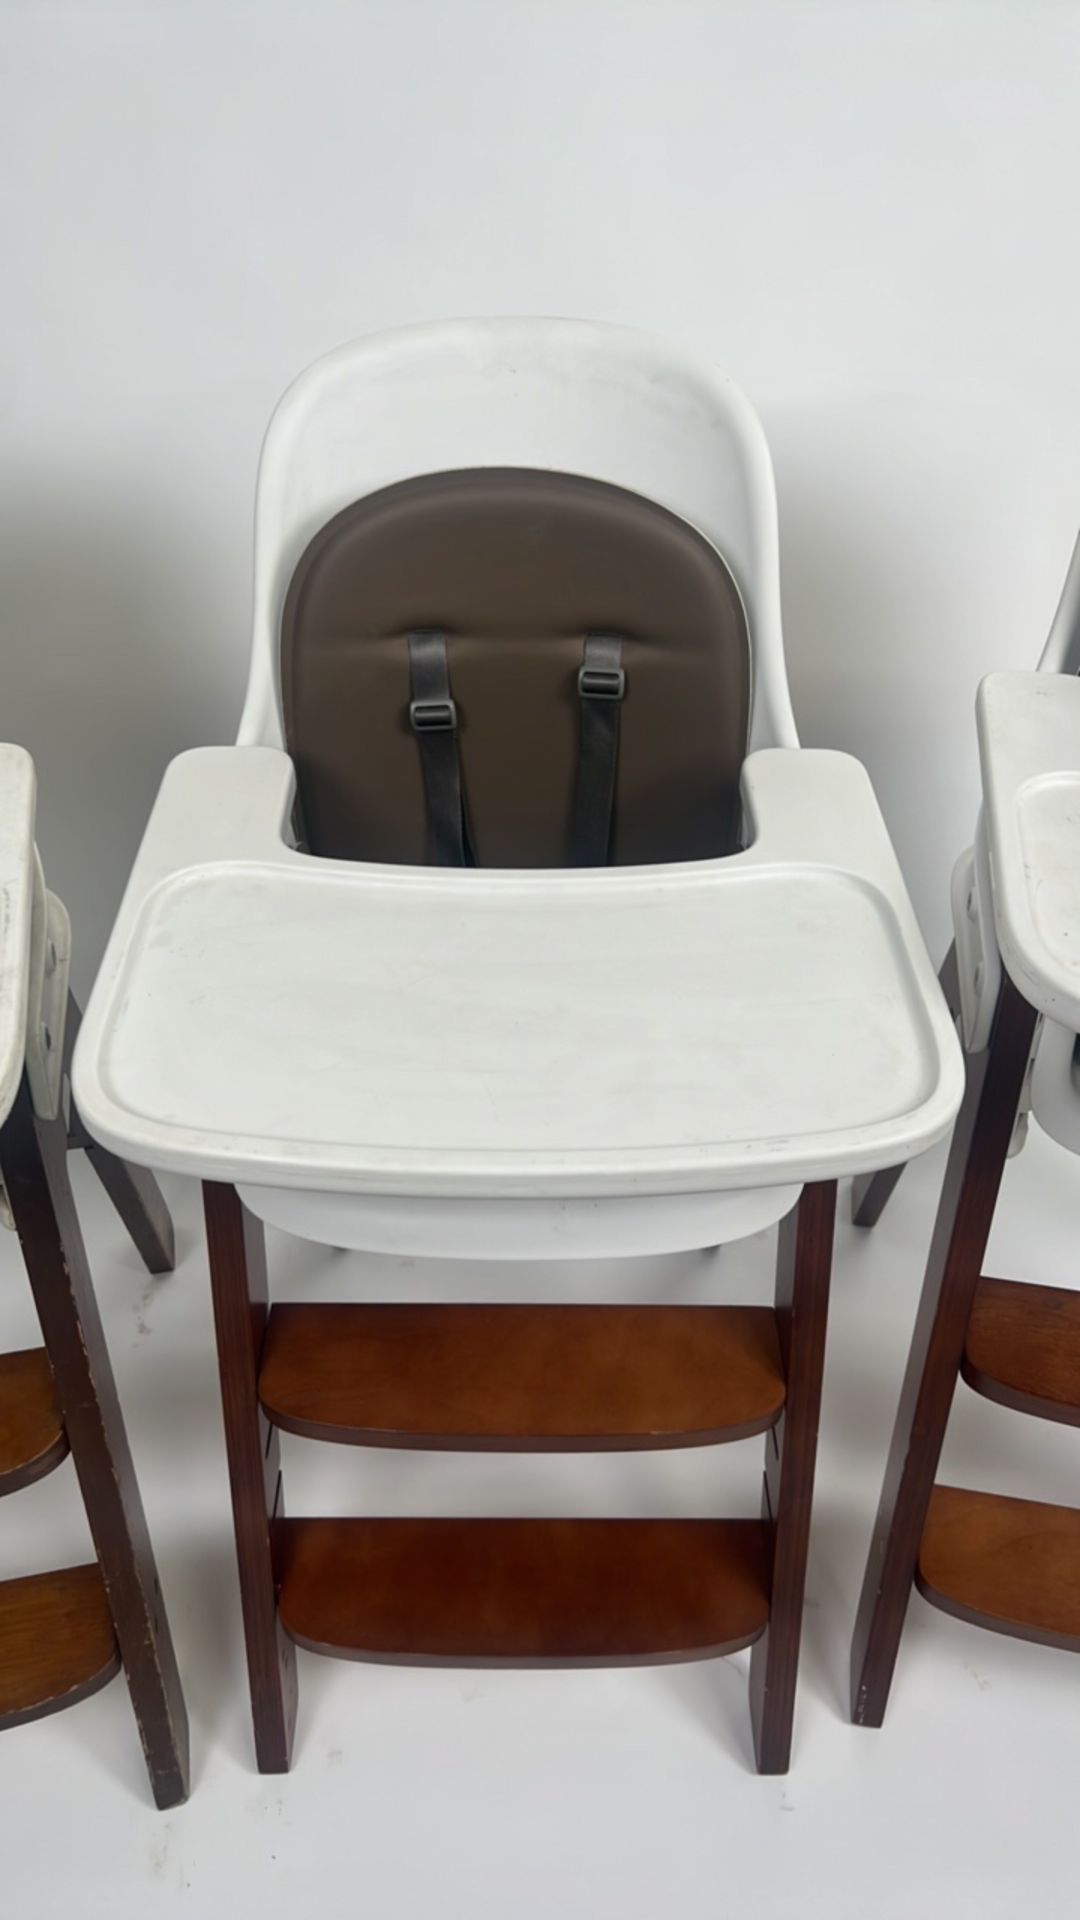 Trio of Wooden and Faux Leather High Chair - Image 2 of 9